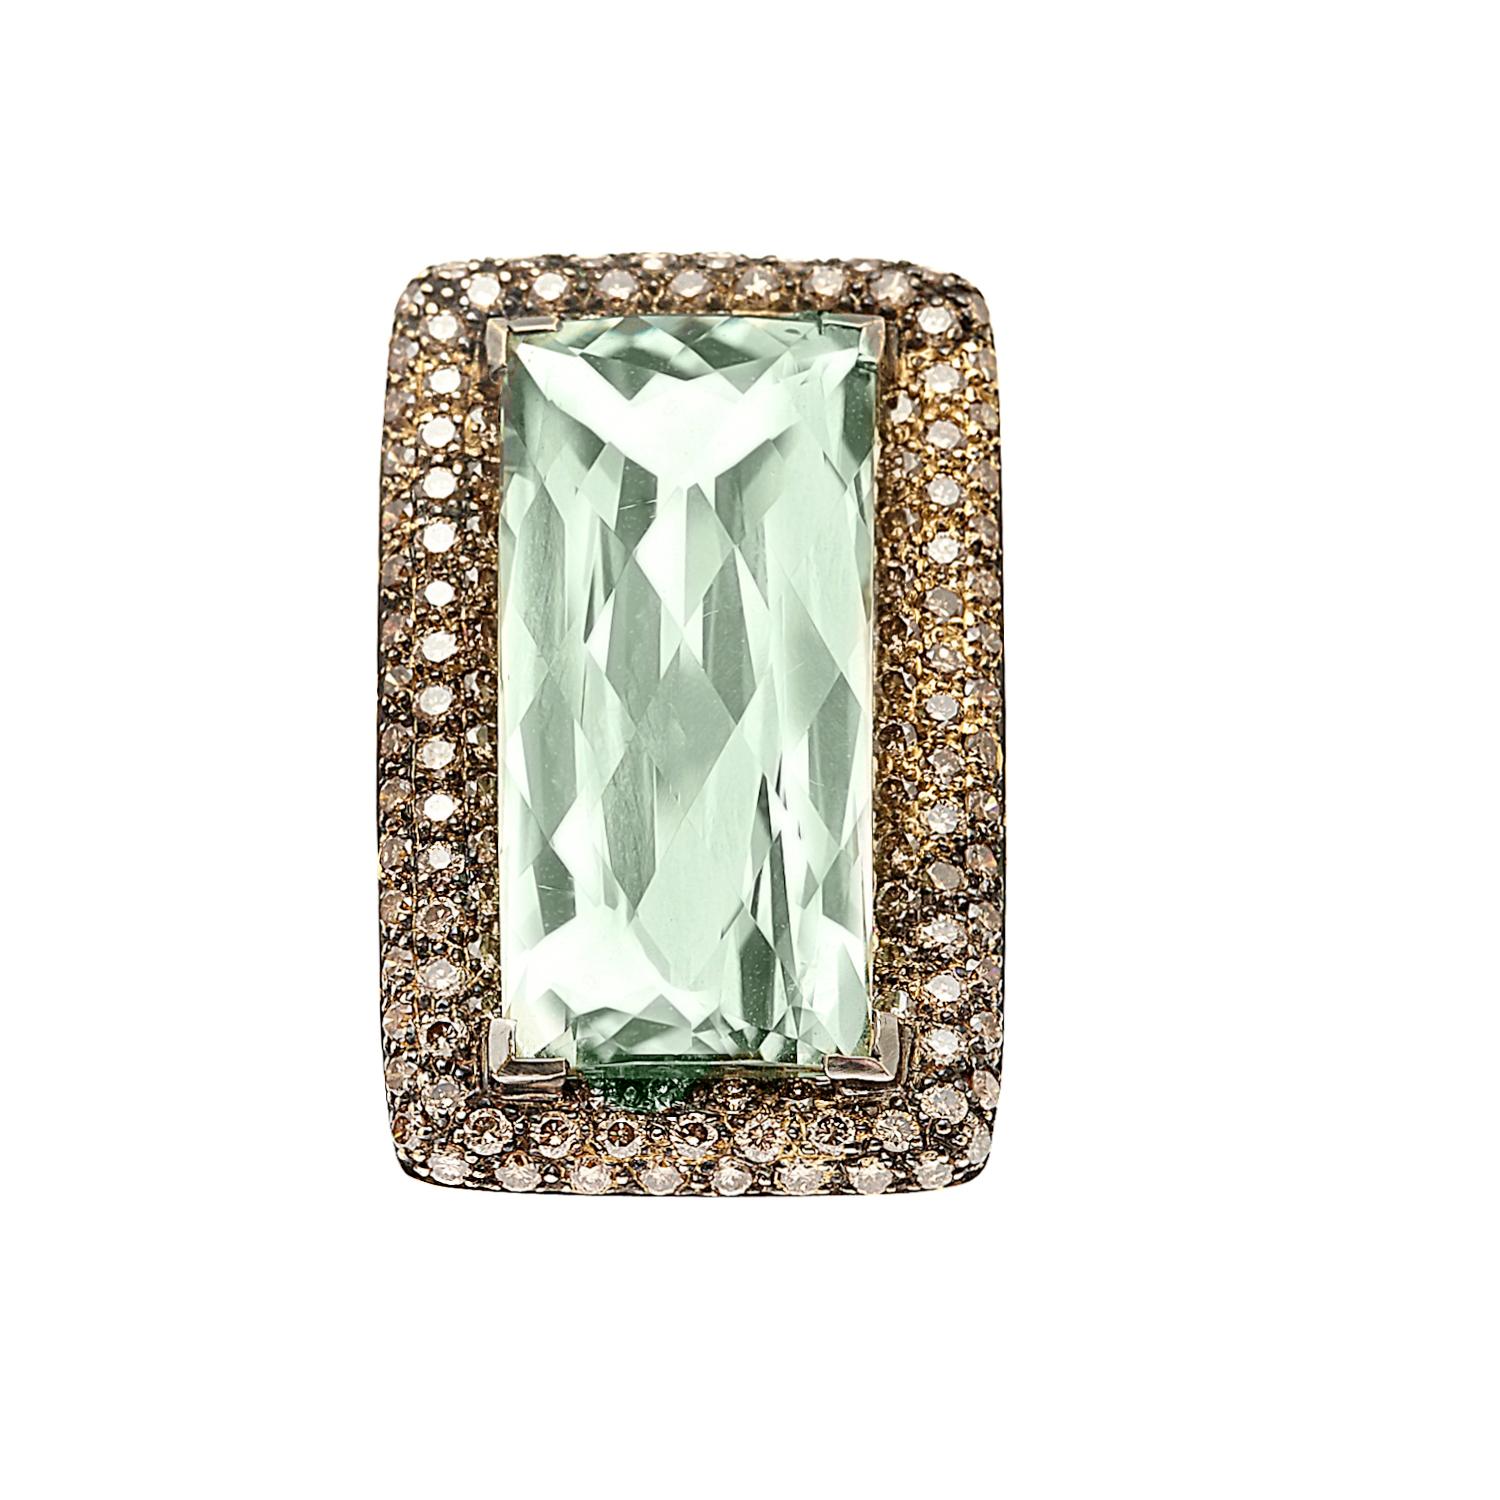 This stunning large cocktail ring features a large 18ct unique green amethyst center stone with an interesting faceting pattern. The stone is surrounded by 2.03ct of small shimmering brown diamonds to complete the piece.